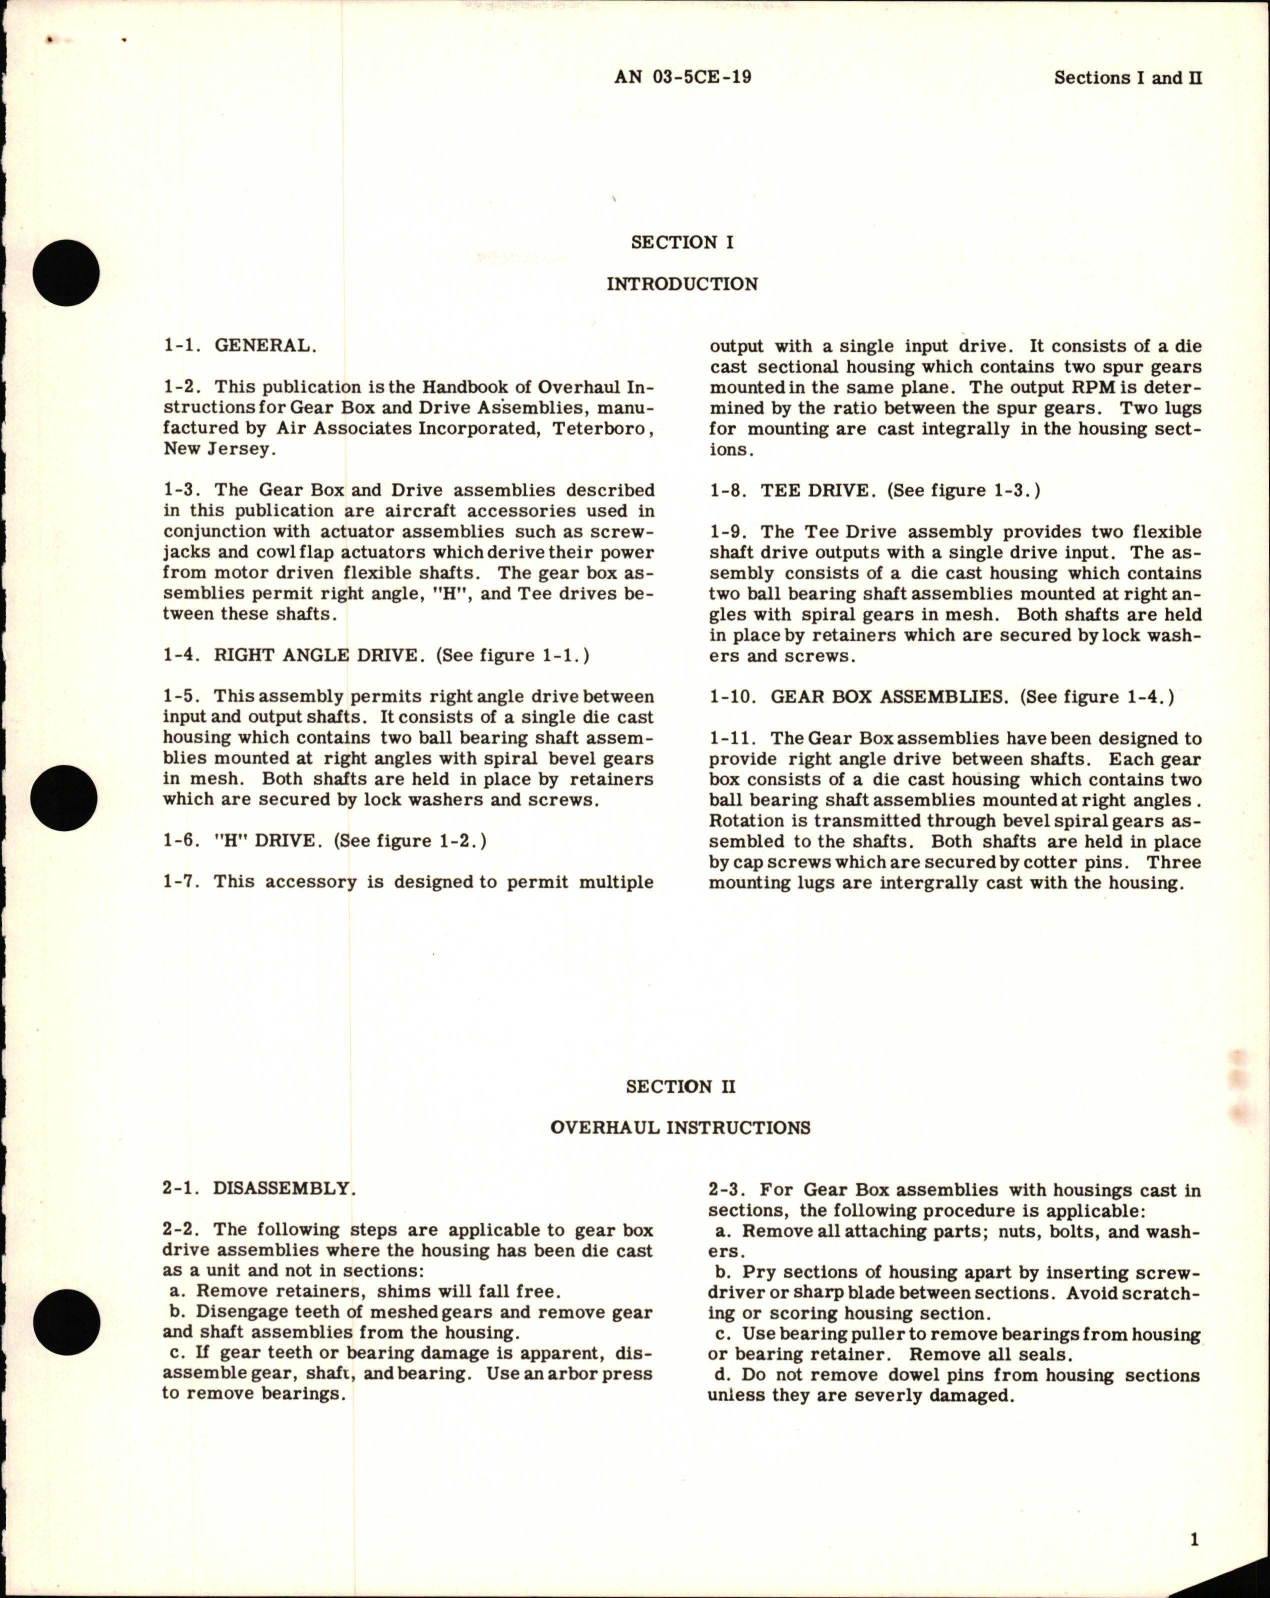 Sample page 5 from AirCorps Library document: Overhaul Instructions for Gear Box and Drive Assemblies